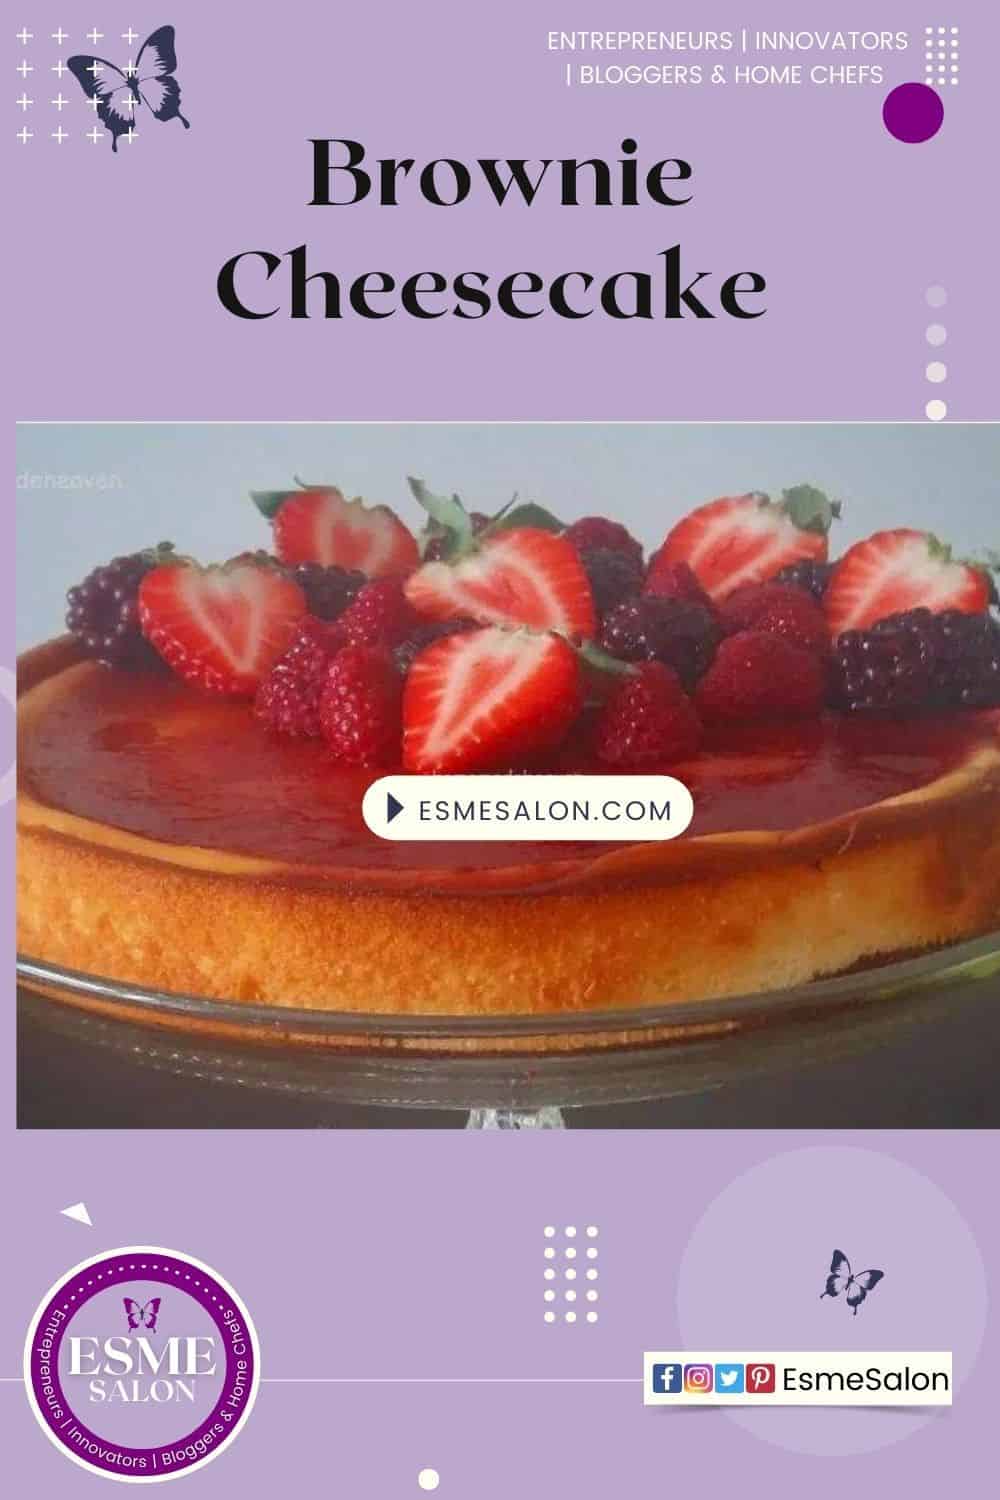 Brownie Cheesecake with strawberries as topping